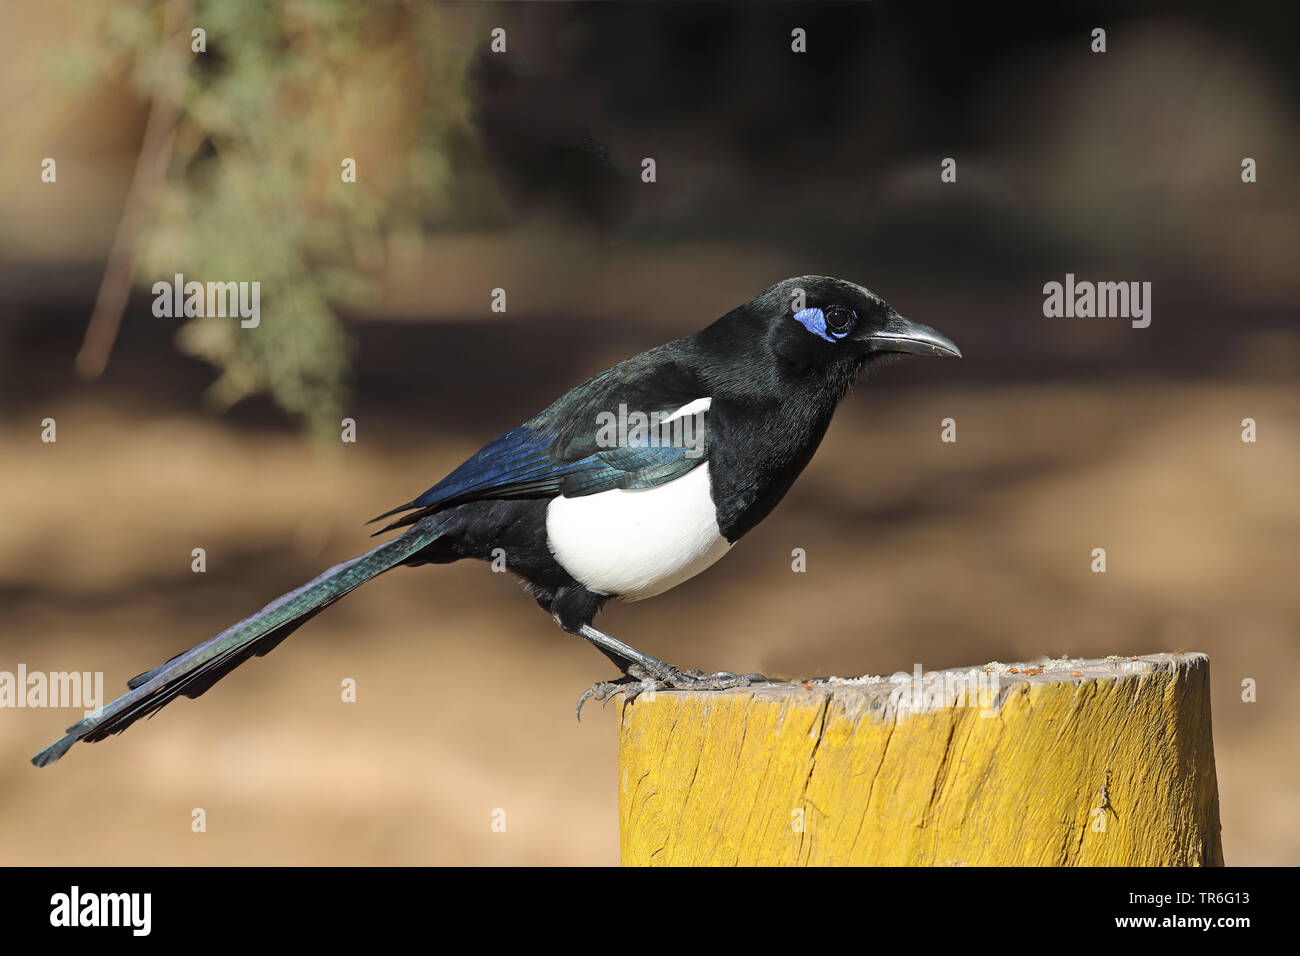 Maghreb Magpie (Pica pica mauritanica, Pica mauritanica), sitting on a pile, Morocco, Souss Massa National Park Stock Photo